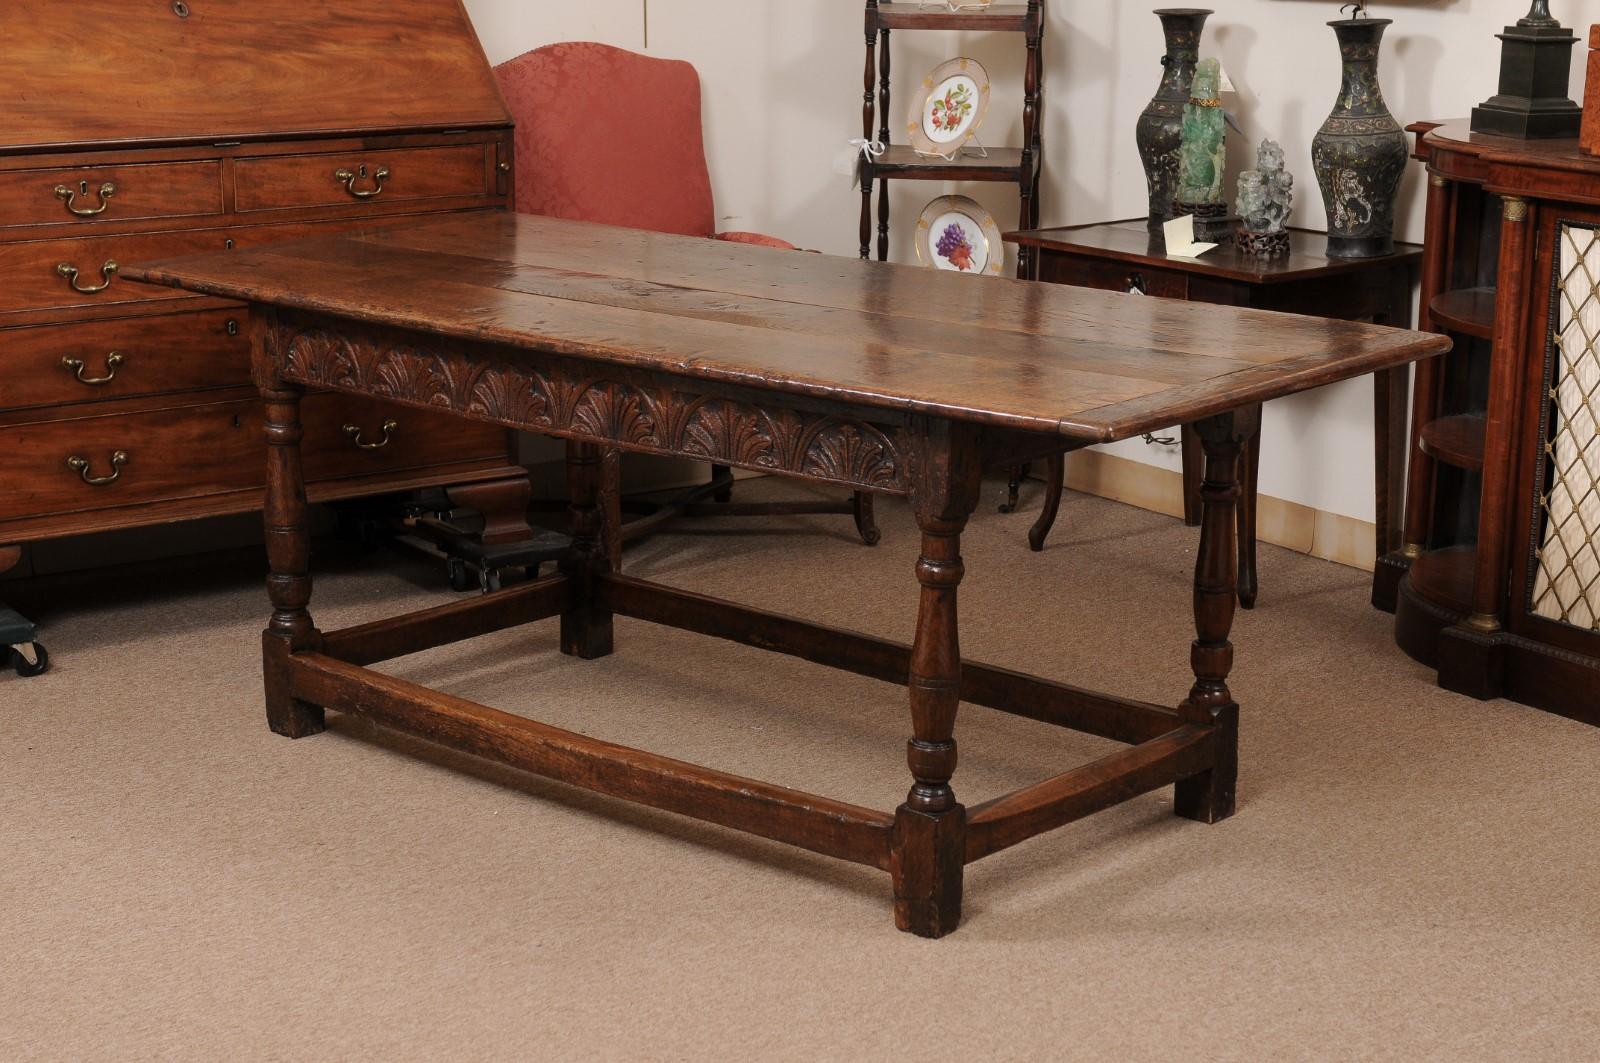  Early 18th Century English Long Oak Hall Table with Carved Frieze, Turned Legs  For Sale 2